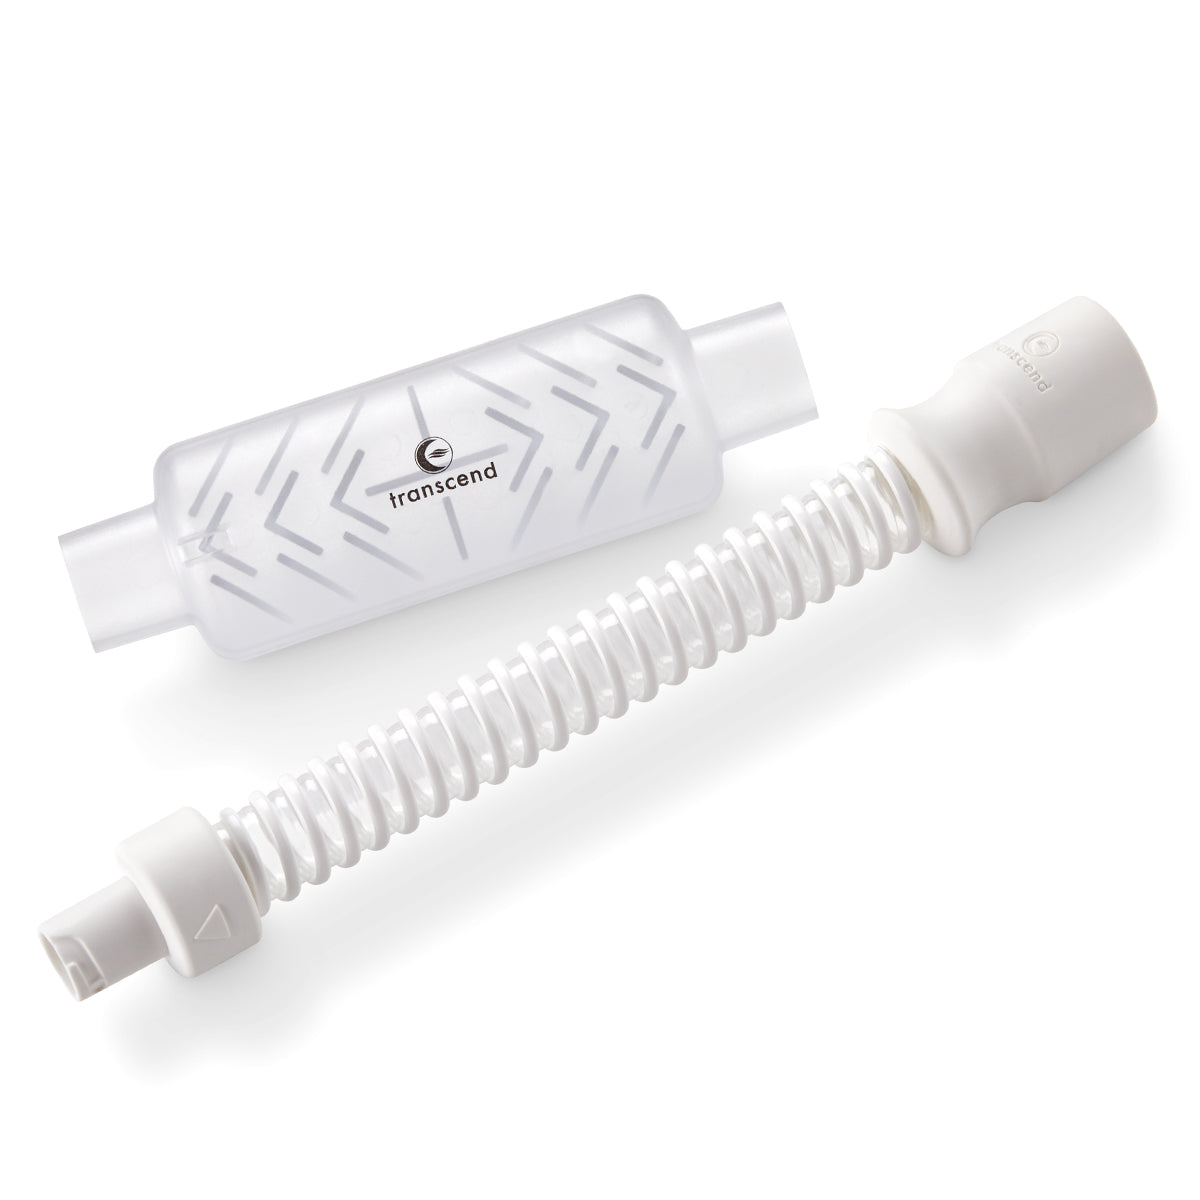 WhisperSoft Tubing Kit for Transcend Micro CPAP Machines